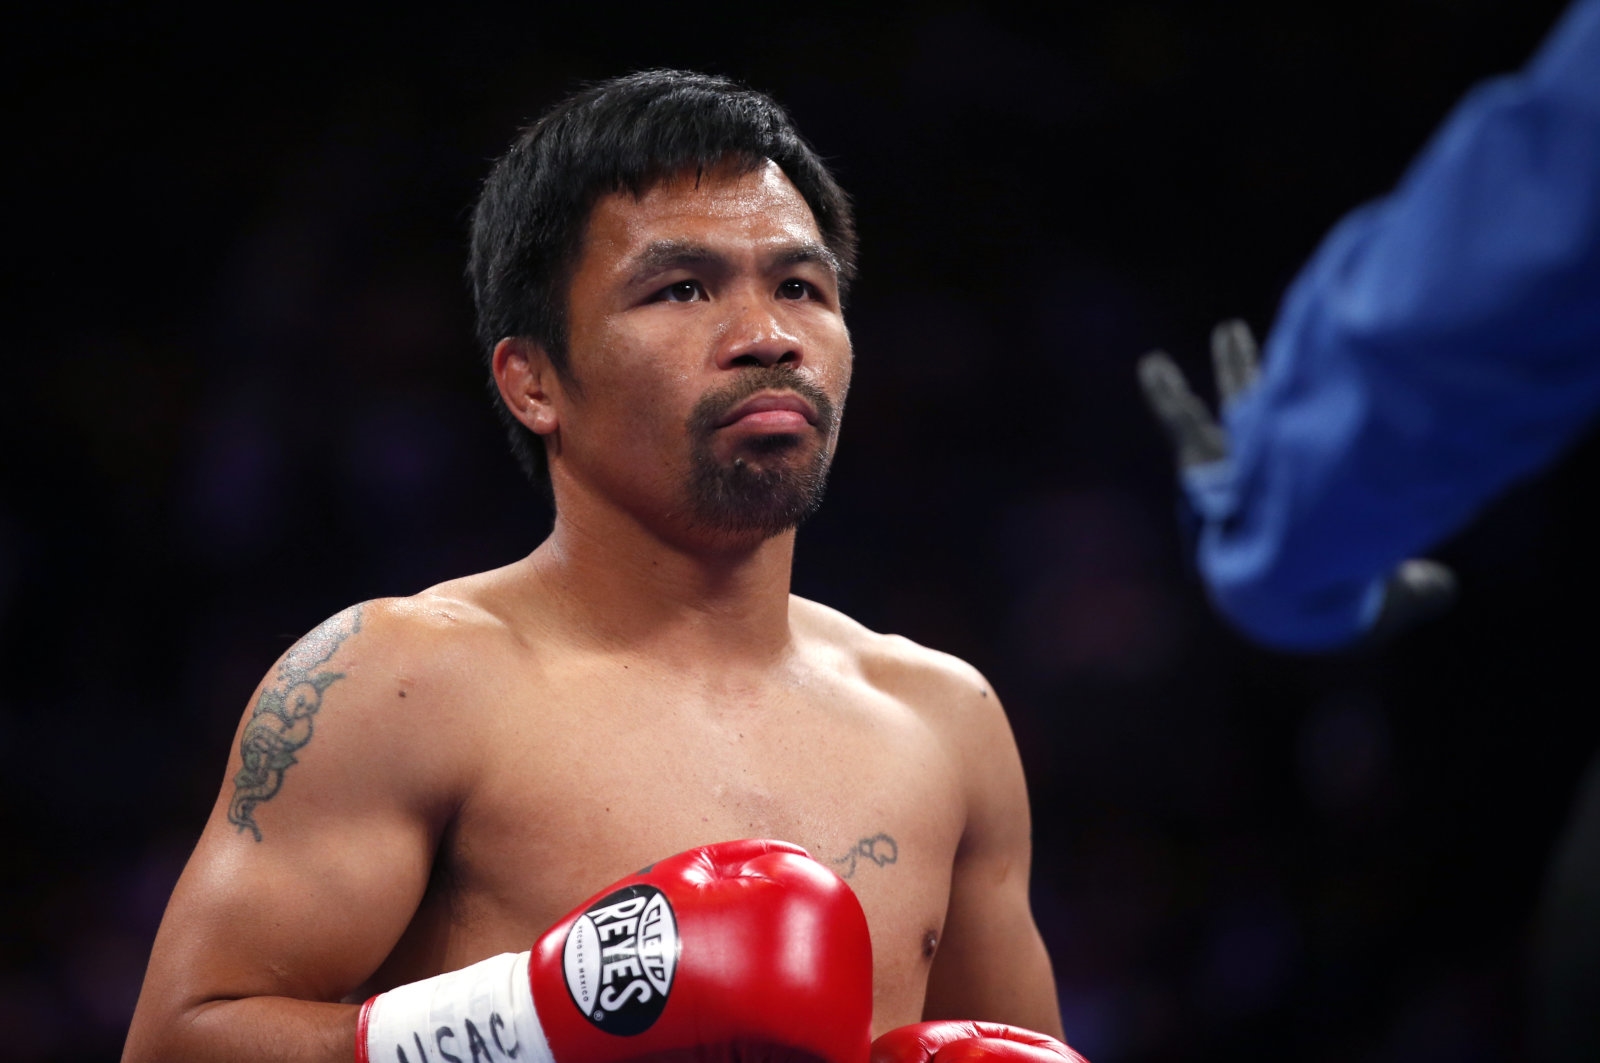 Boxer Manny Pacquiao intros cryptocurrency to cash in on his fame | DeviceDaily.com